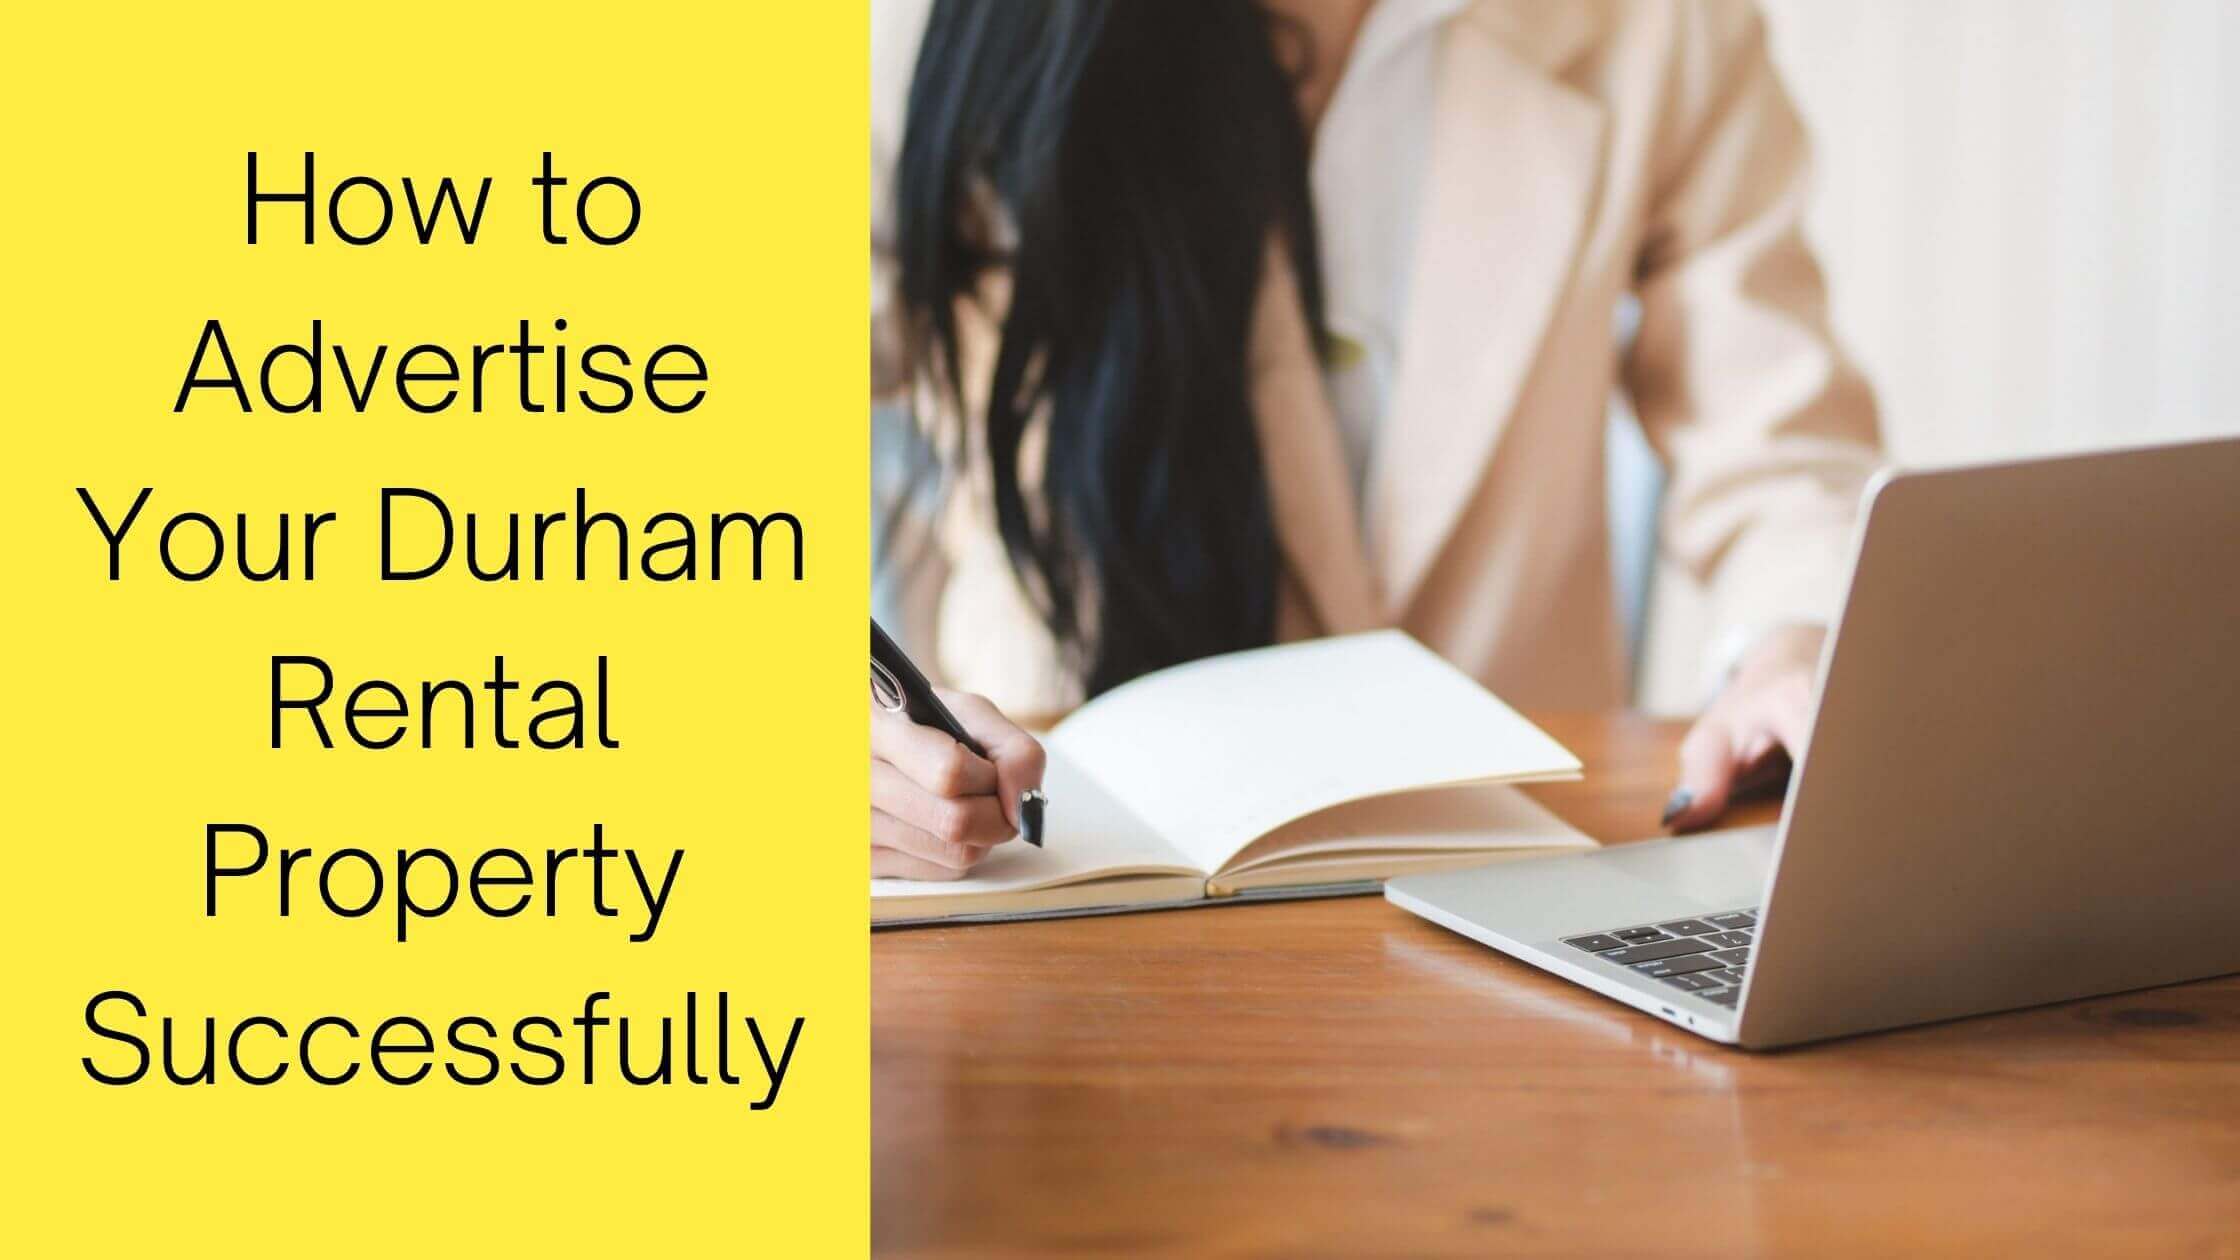 How to Advertise Your Durham Rental Property Successfully